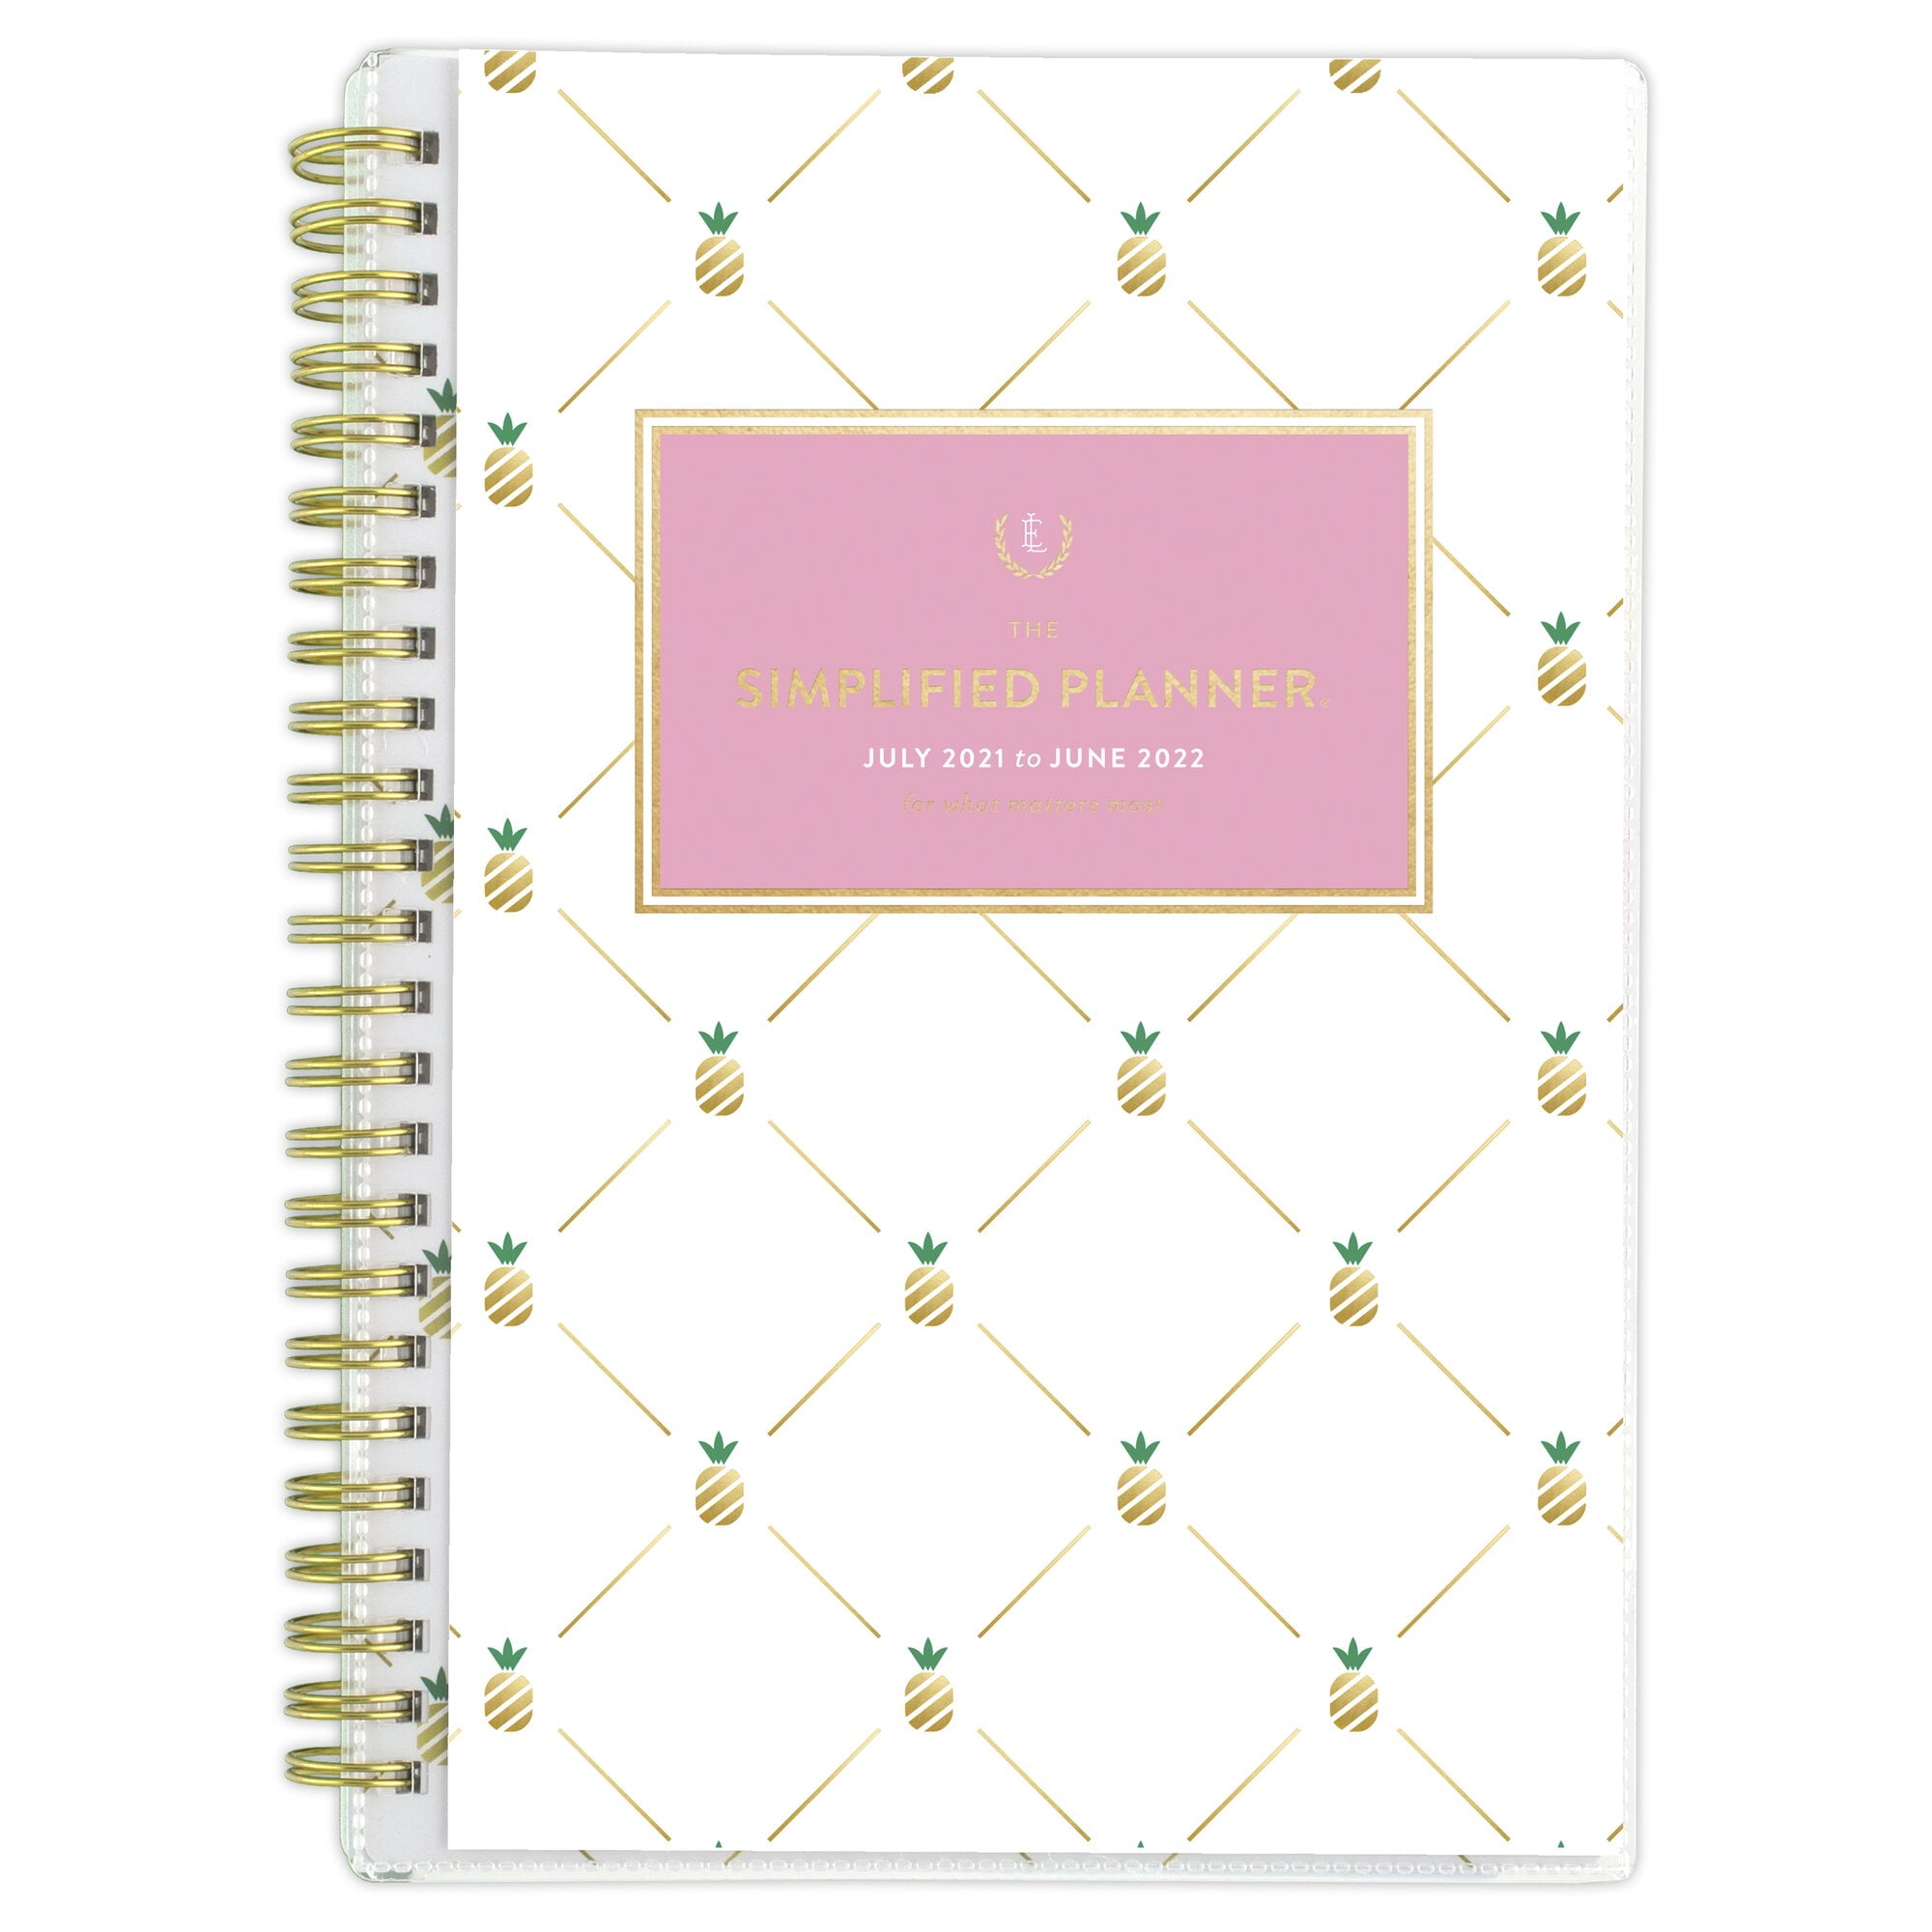 Designer Printable Undated Monthly Planner Spread in Teal and Purple